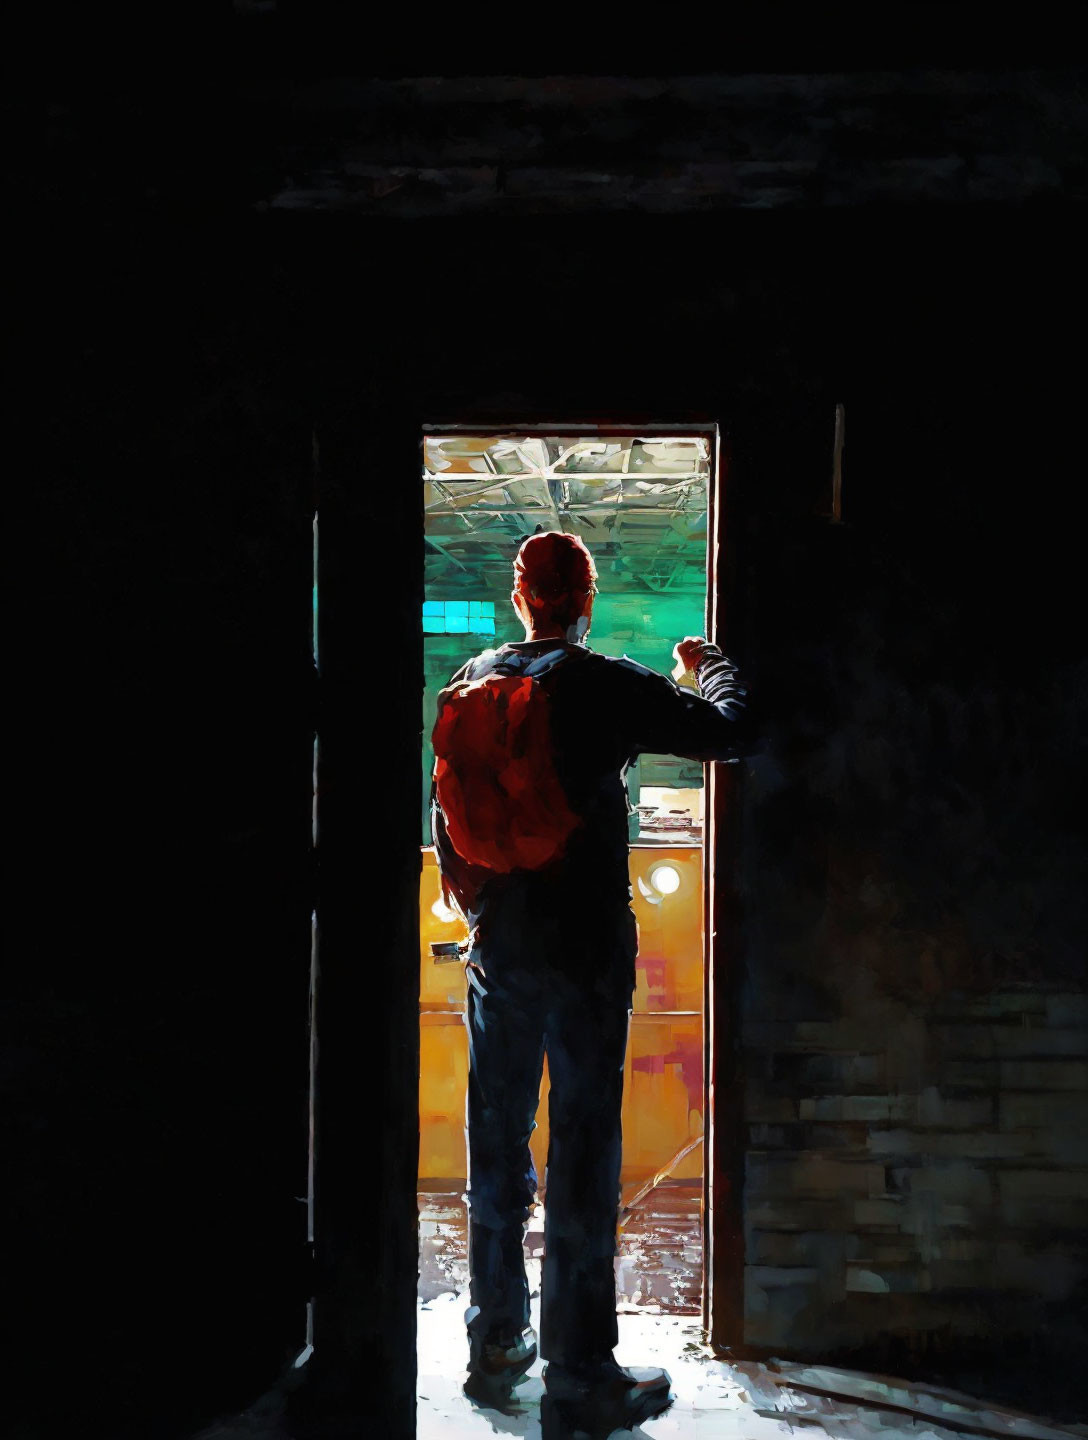 Silhouetted figure in red shirt against vibrant room with green and yellow hues